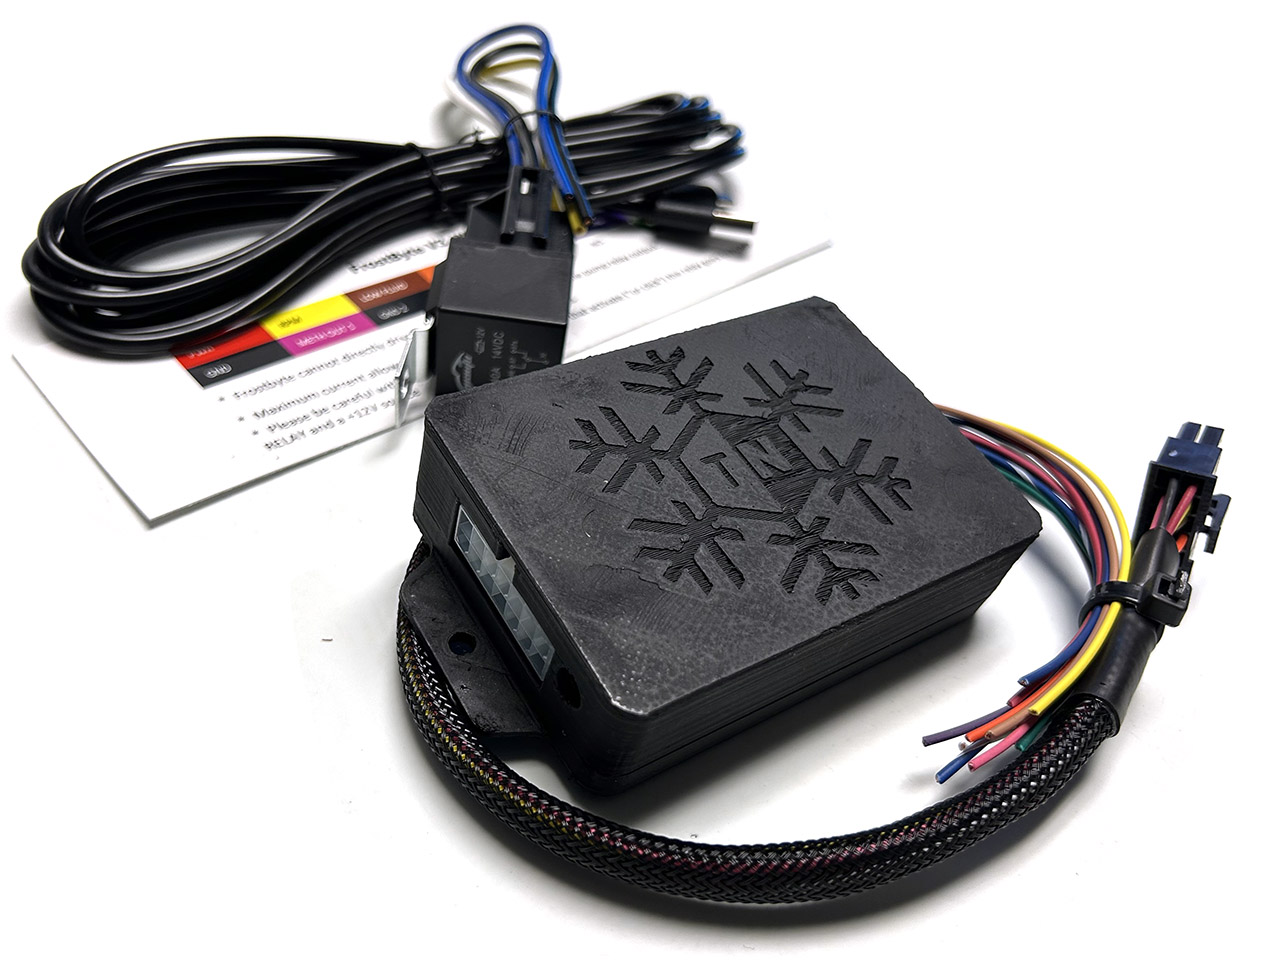 FrostByte water methanol controller